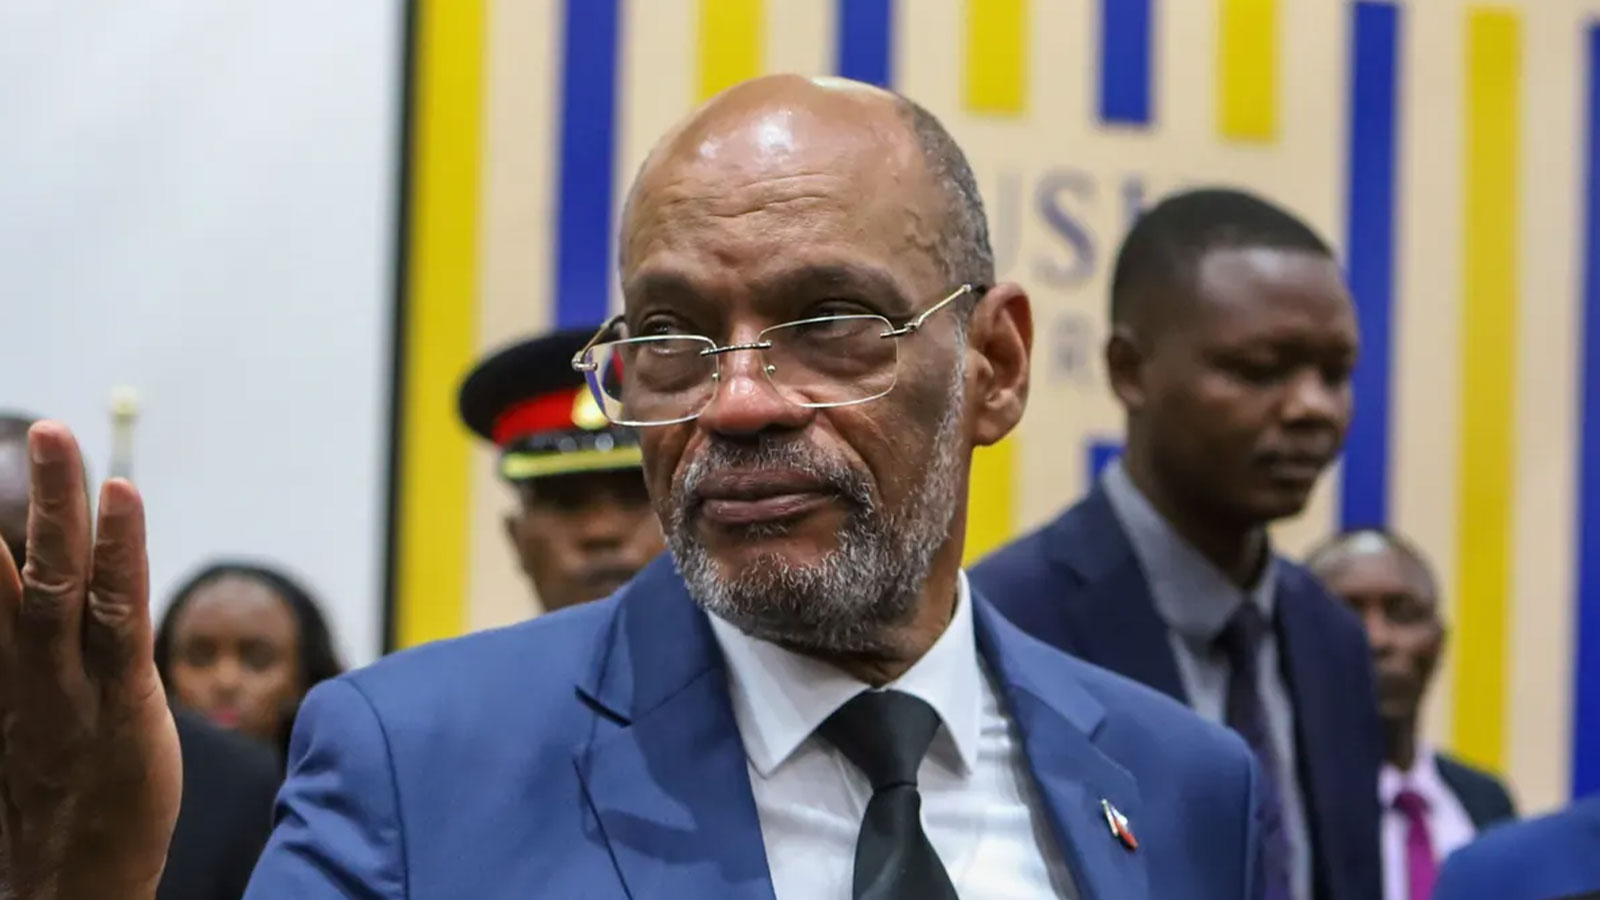 Haiti PM Ariel Henry resigns after gang insurrection caused days of chaos